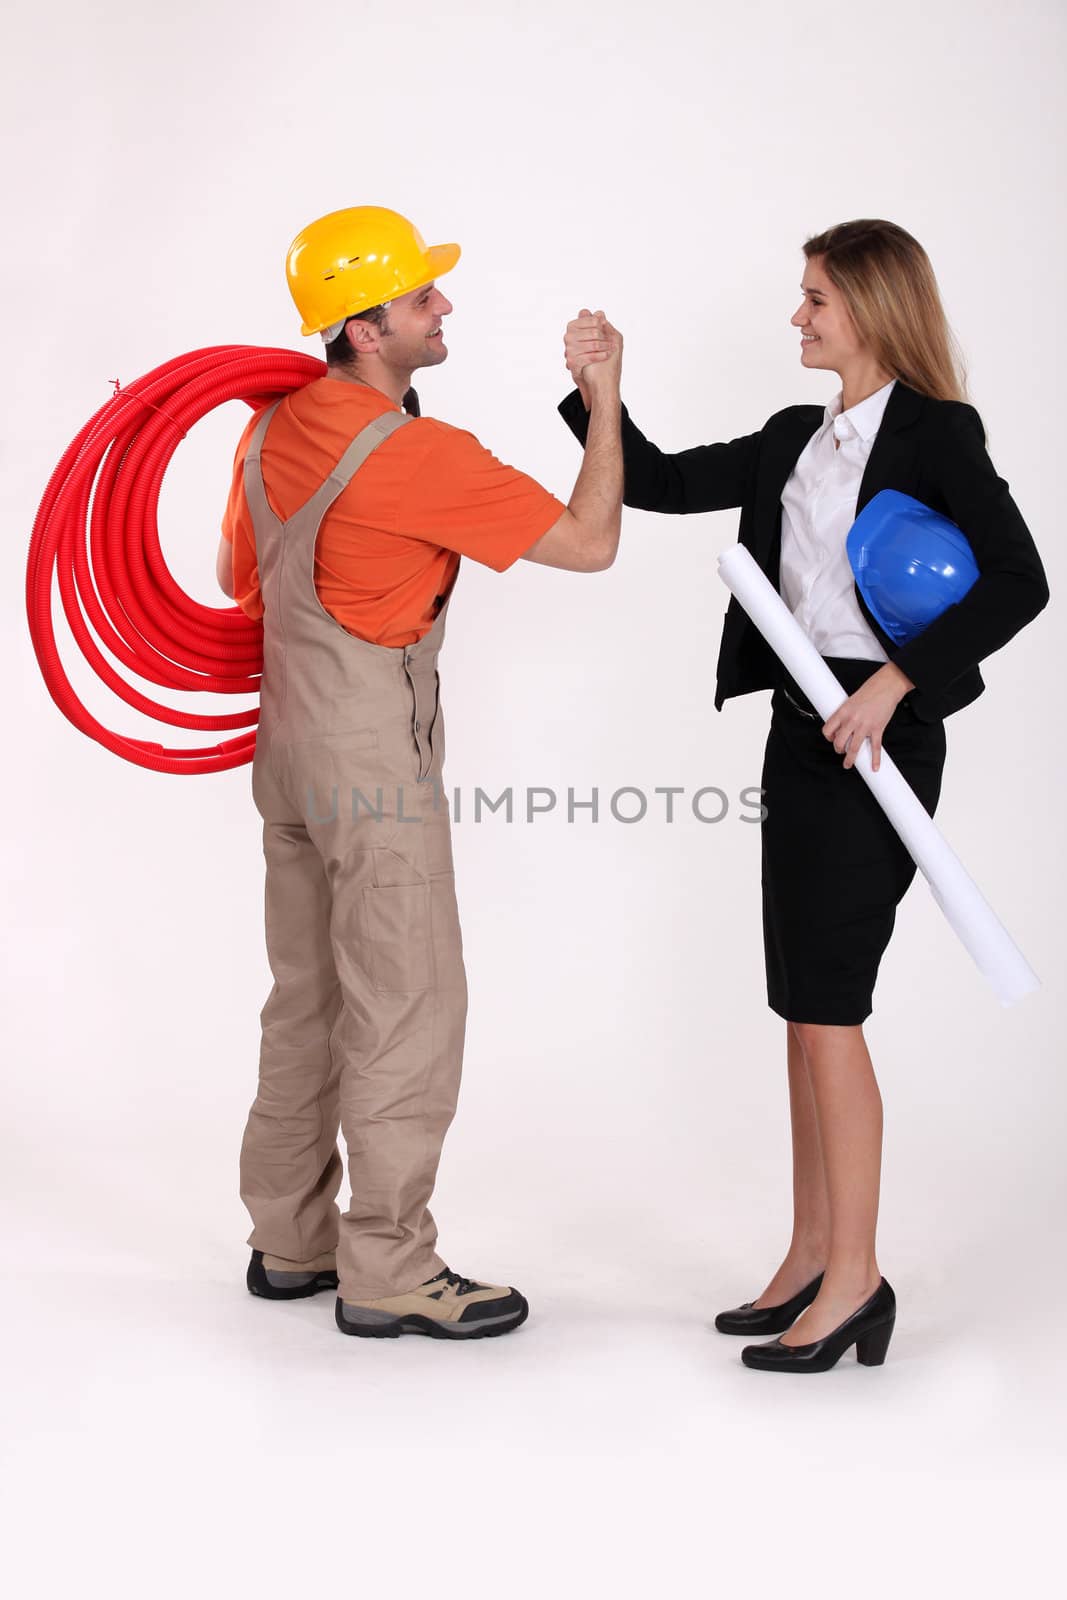 Architect and worker holding hands